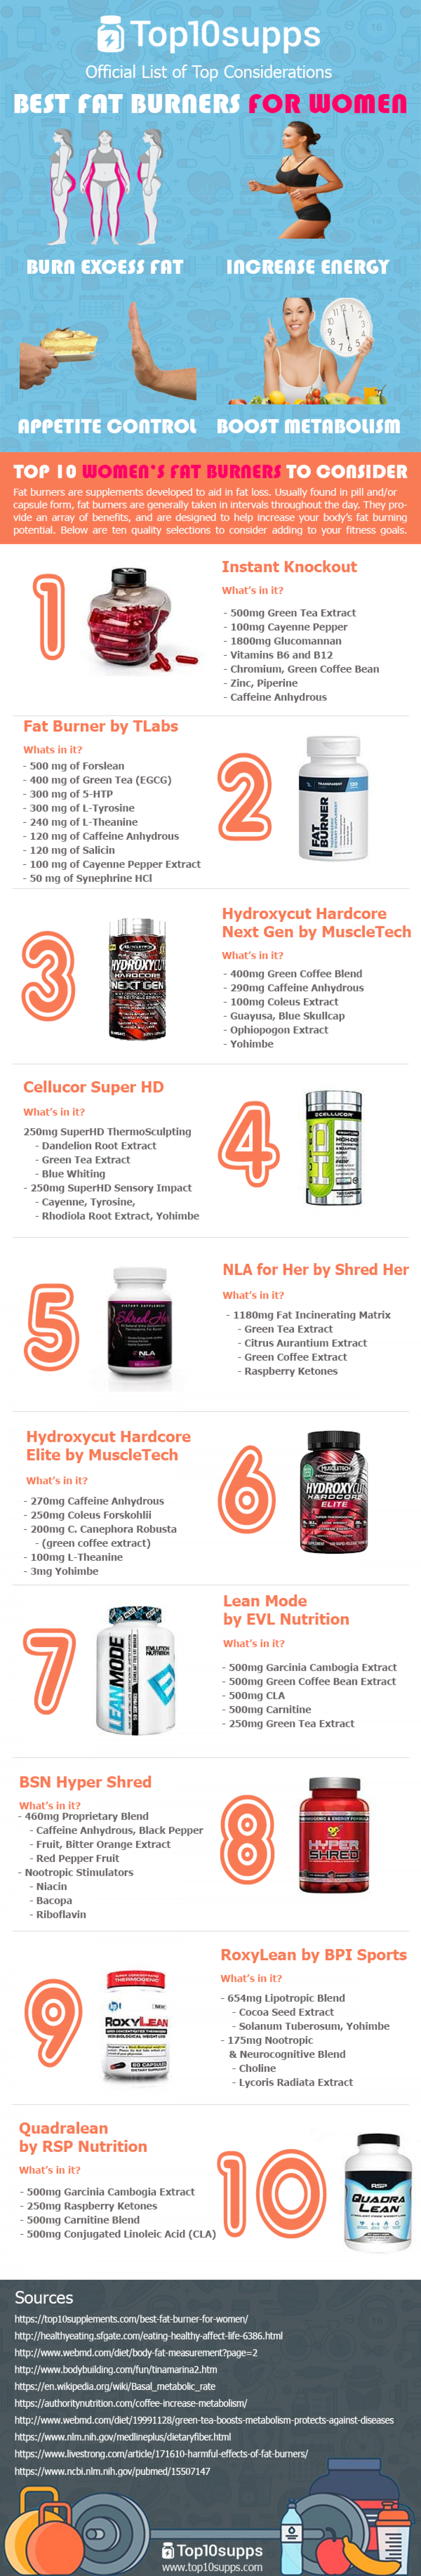 Help Cut the Fat With These Top 10 Proven Women's Fat Burners Infographic